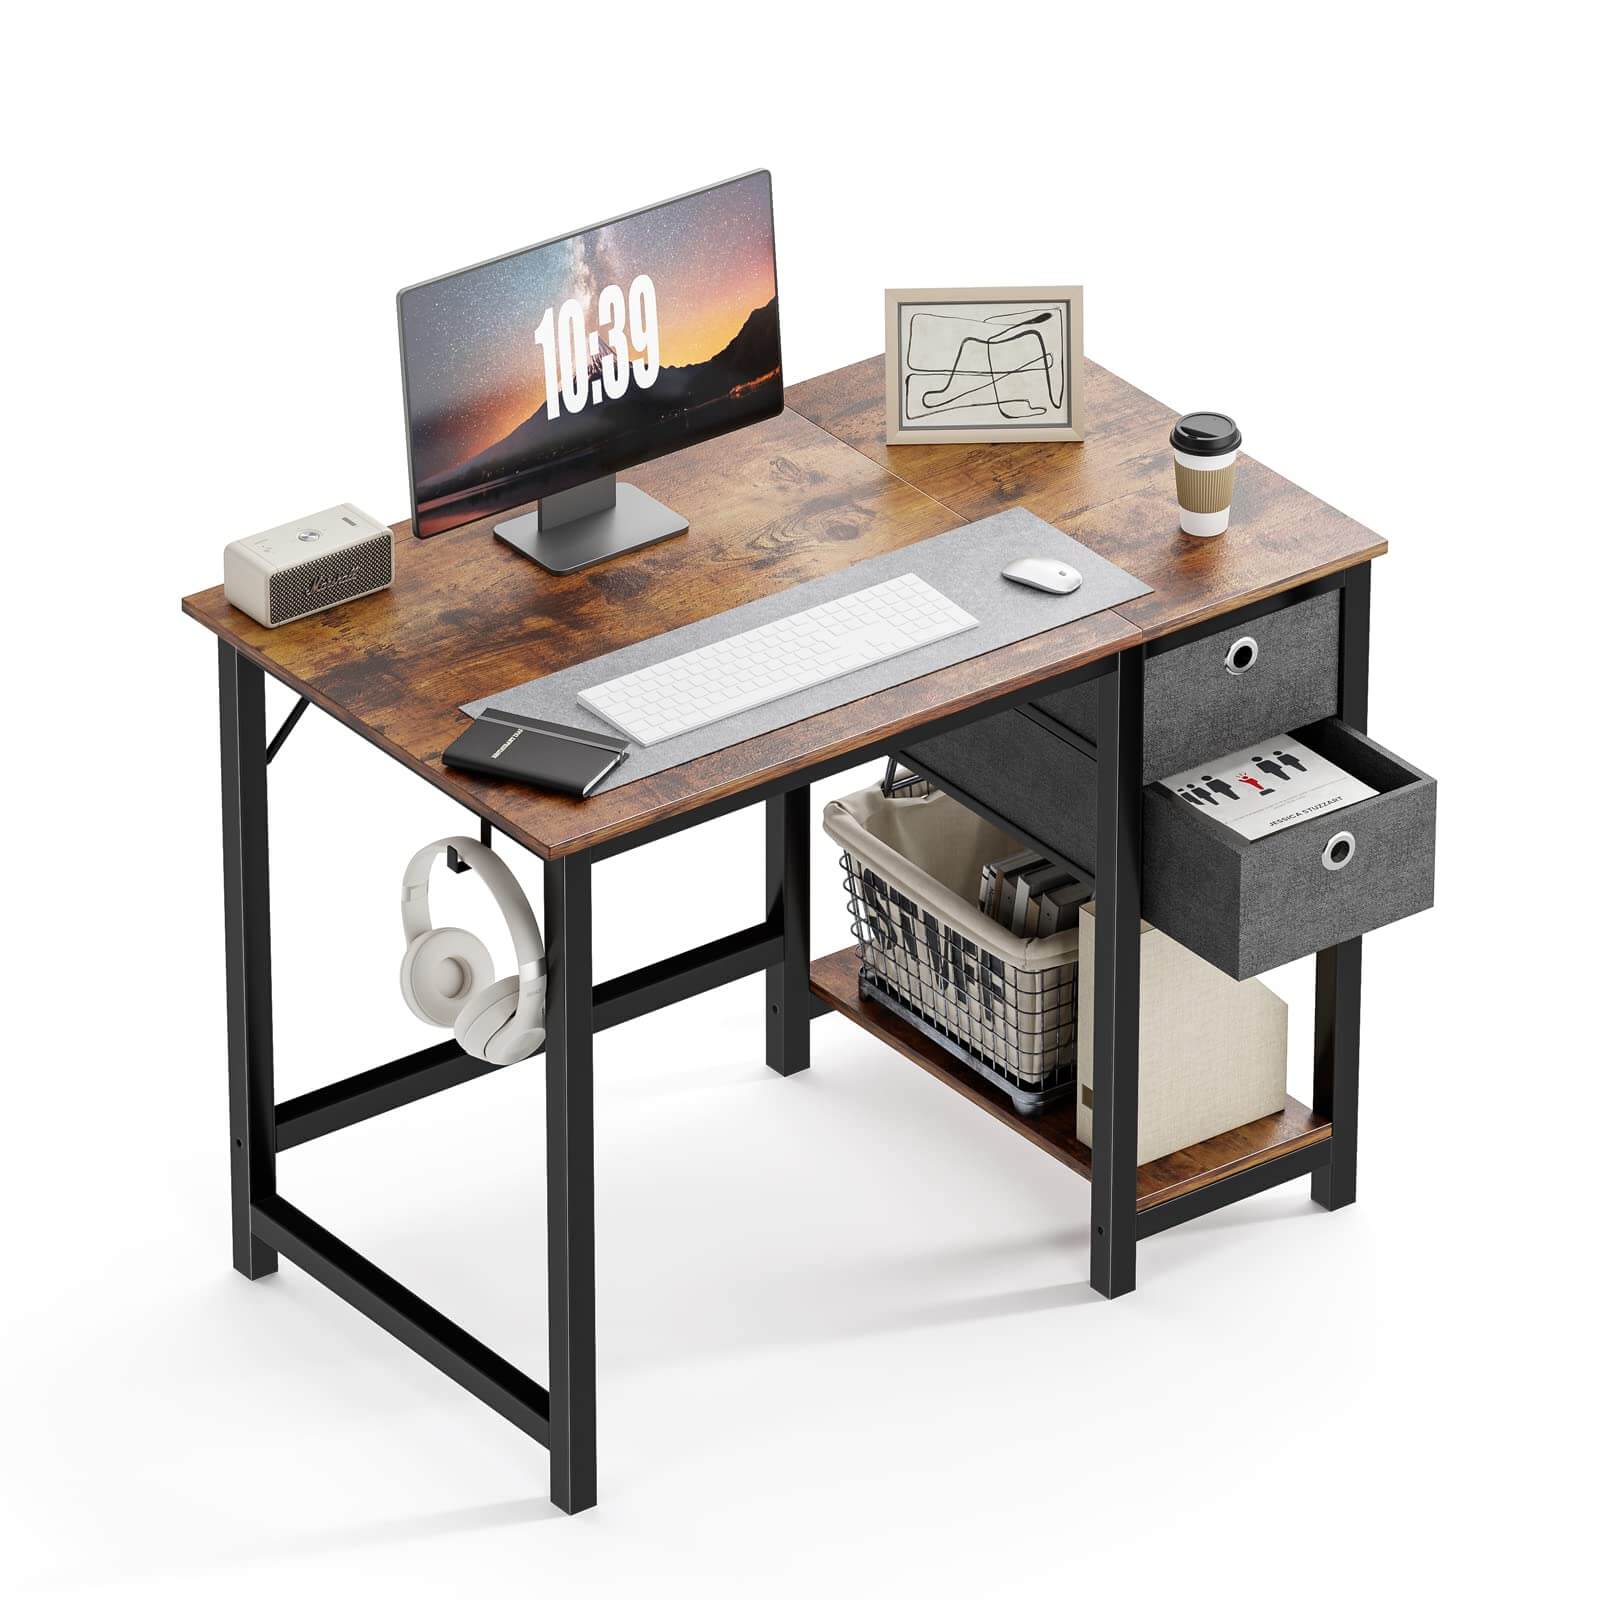 Computer Desk Small Office Desk 40 Inch Writing Desks Small Space Desk  Study Table Modern Simple Style Work Table with Storage Bag Iron Hook  Wooden